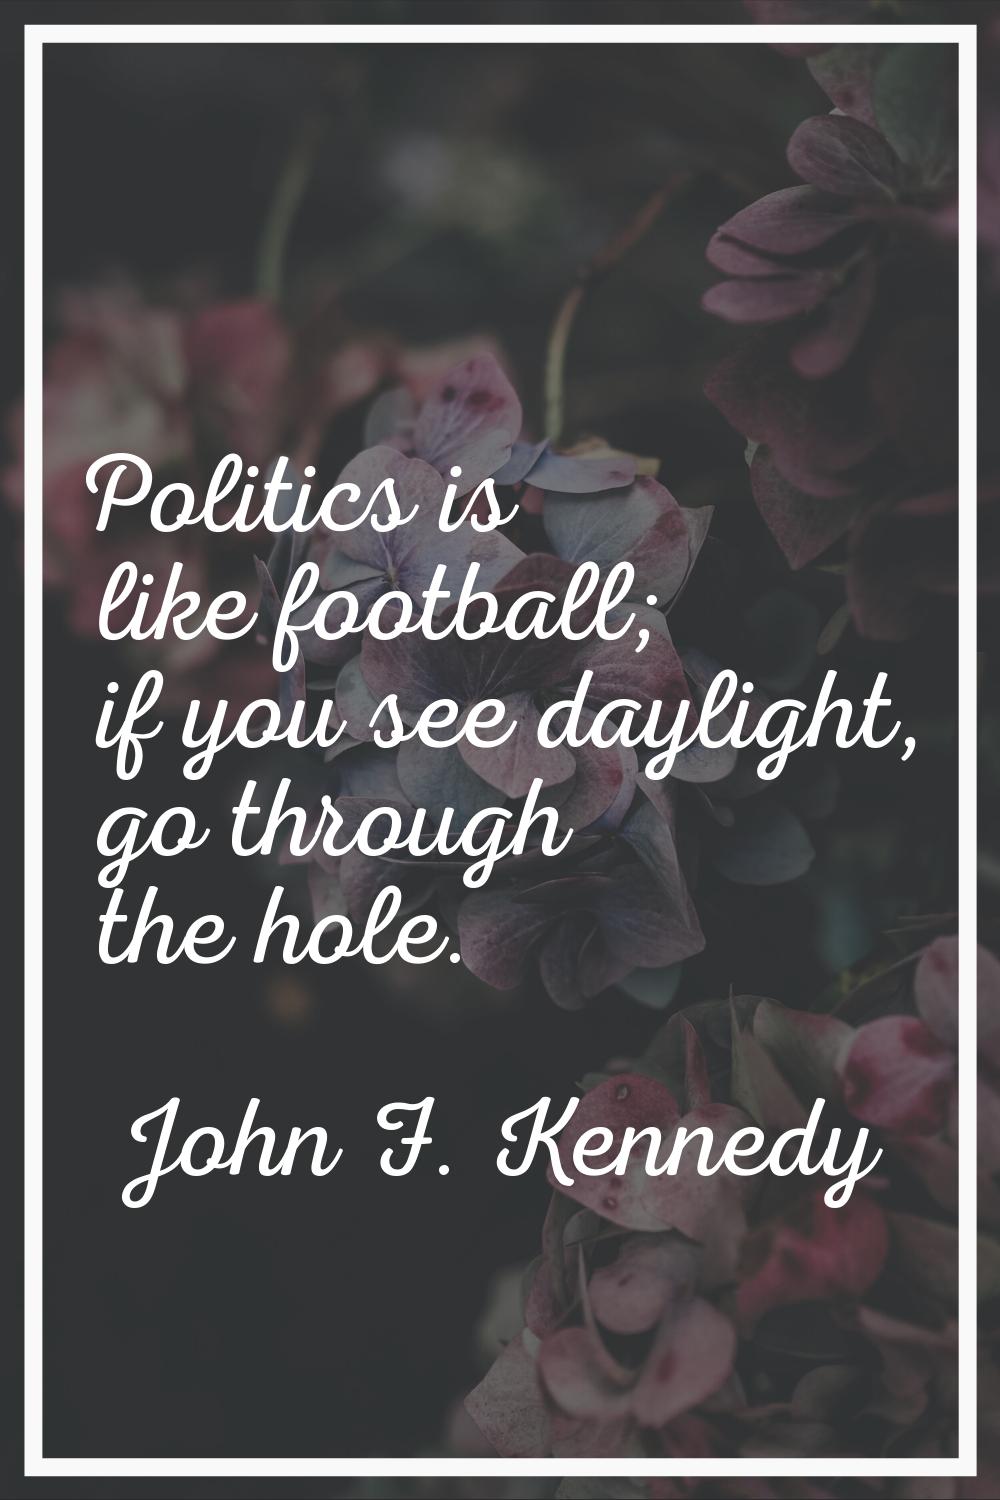 Politics is like football; if you see daylight, go through the hole.